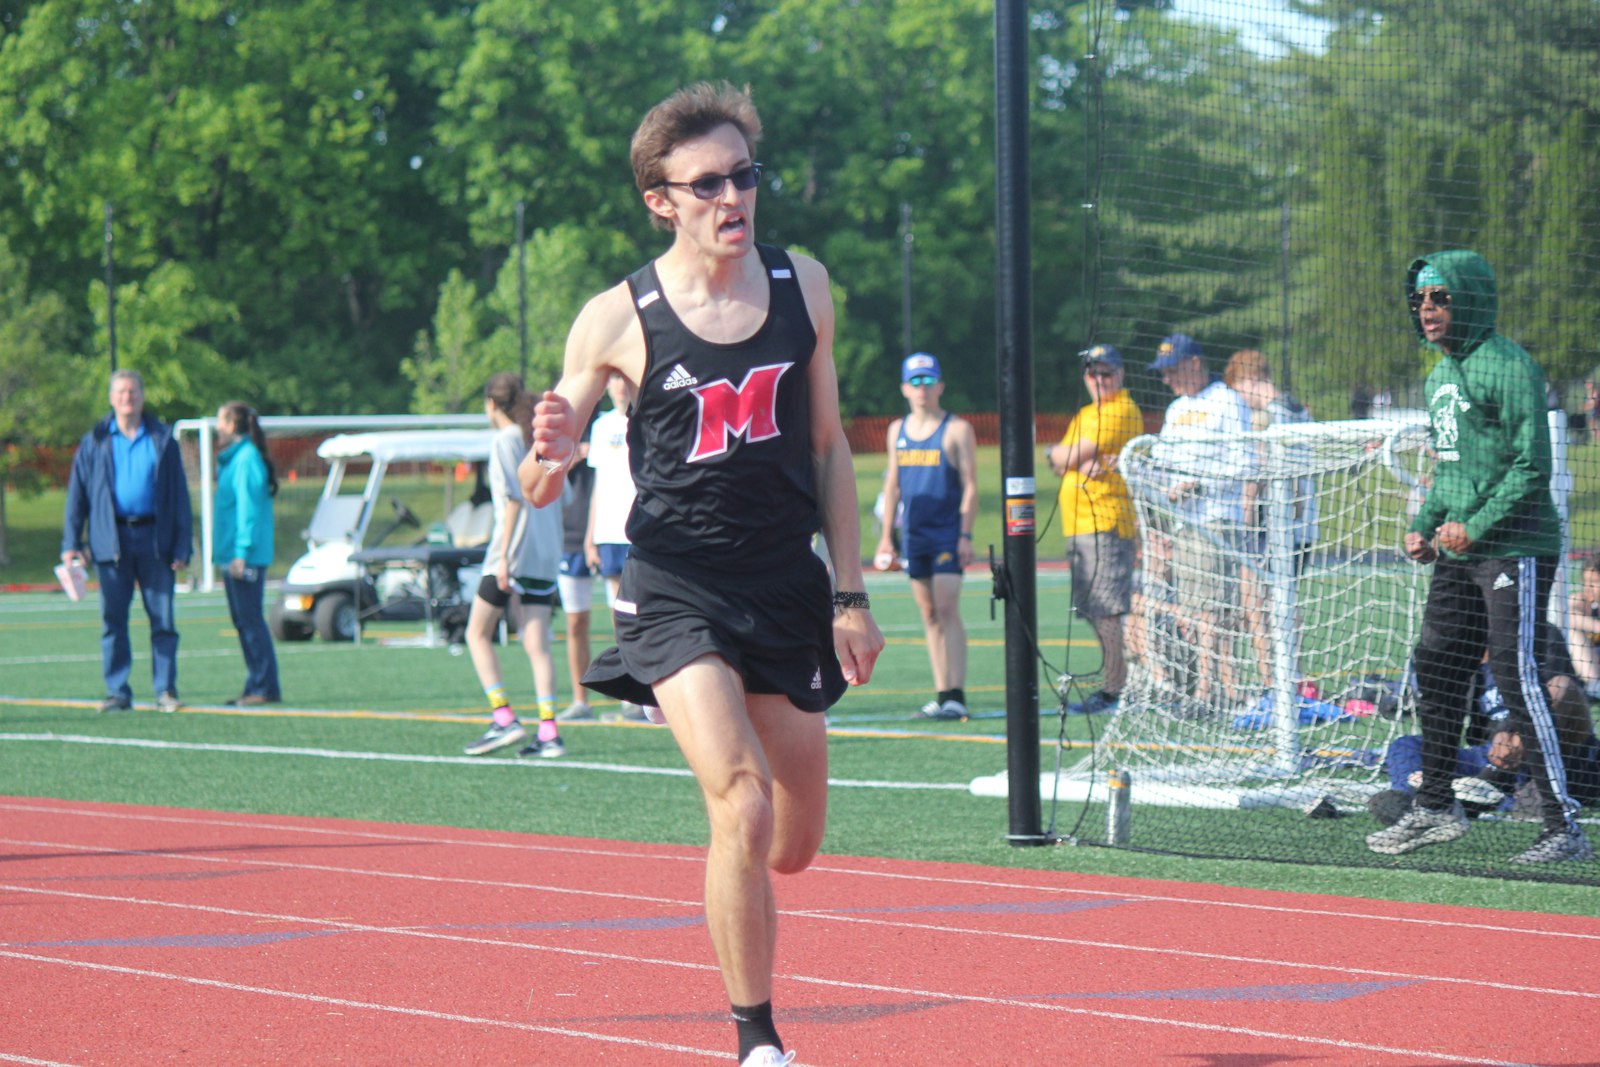 Tyler Lenn of Marine City Cardinal Mooney, who won three individual events at last month’s Catholic League track championship meet, set a state record for Division 4 runners in the 1600 meters, winning the race in 4:14.30 at Hudsonville.